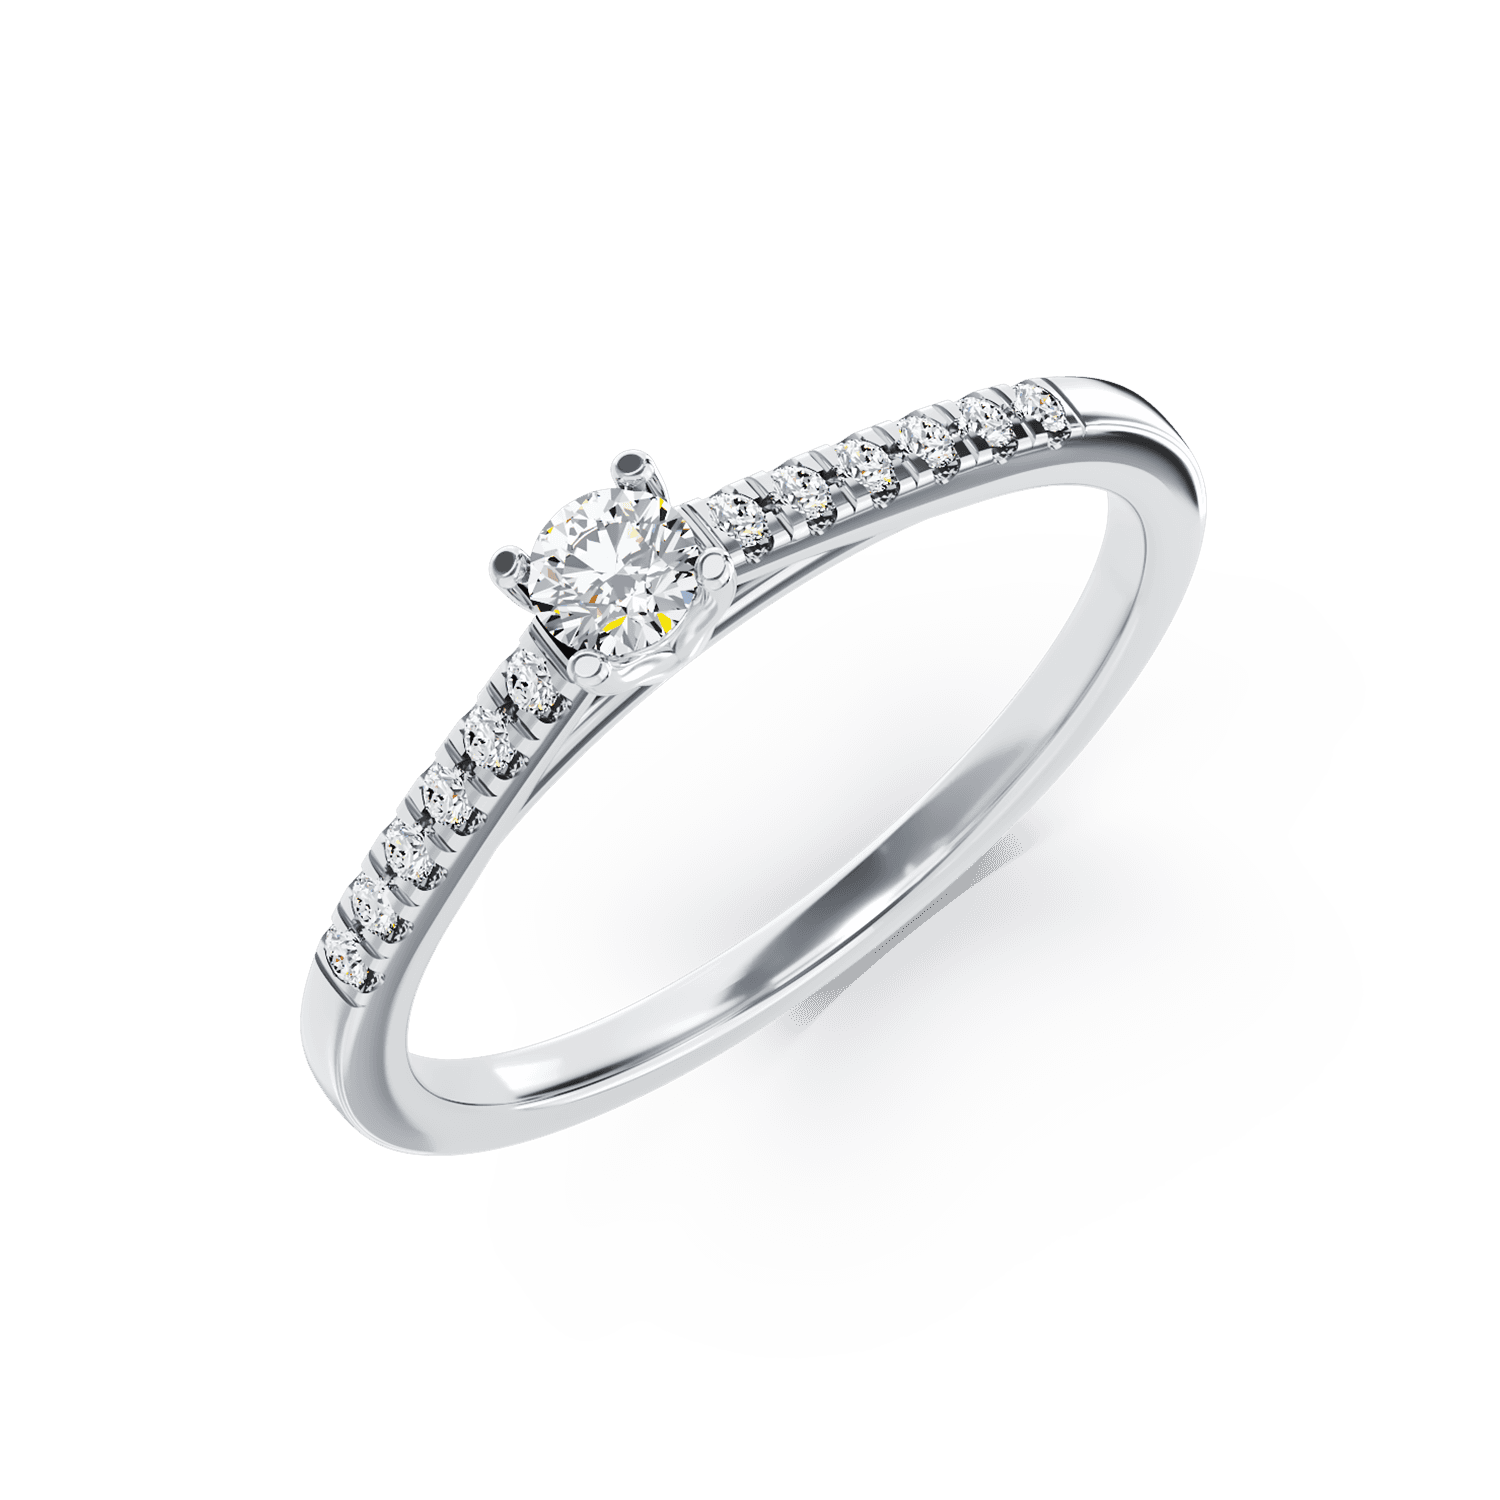 18K white gold engagement ring with 0.24ct diamond and 0.13ct diamonds